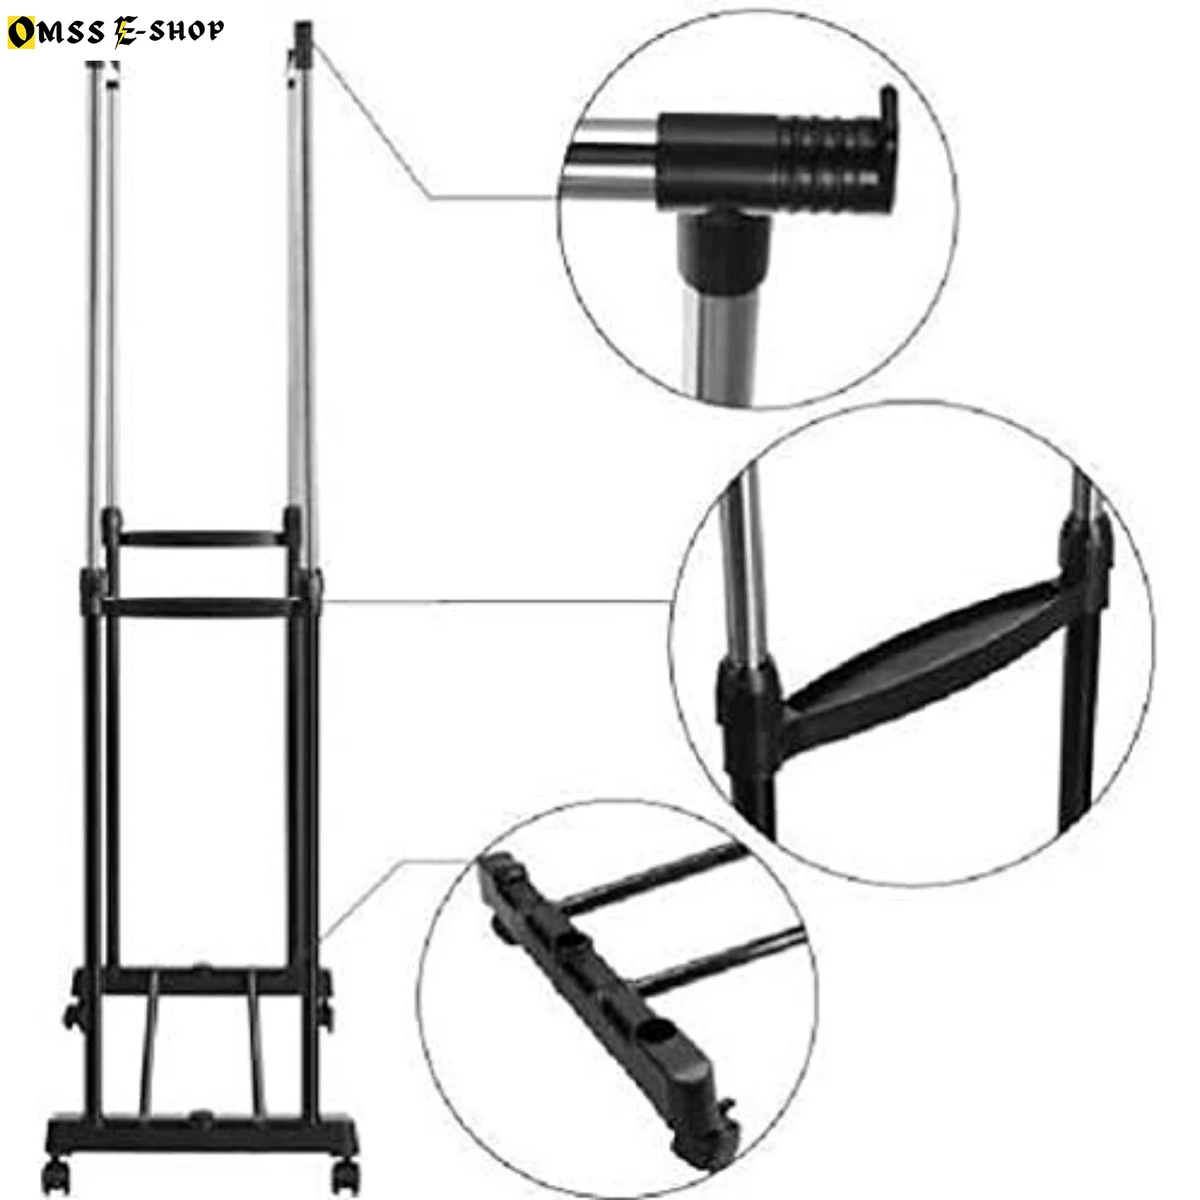 Adjustable Stainless Steel Double-Pole Clothes Hanger/Rack, Rolling Bar Rail Rack (for Clothes/Shoes) RP-950DH-RE